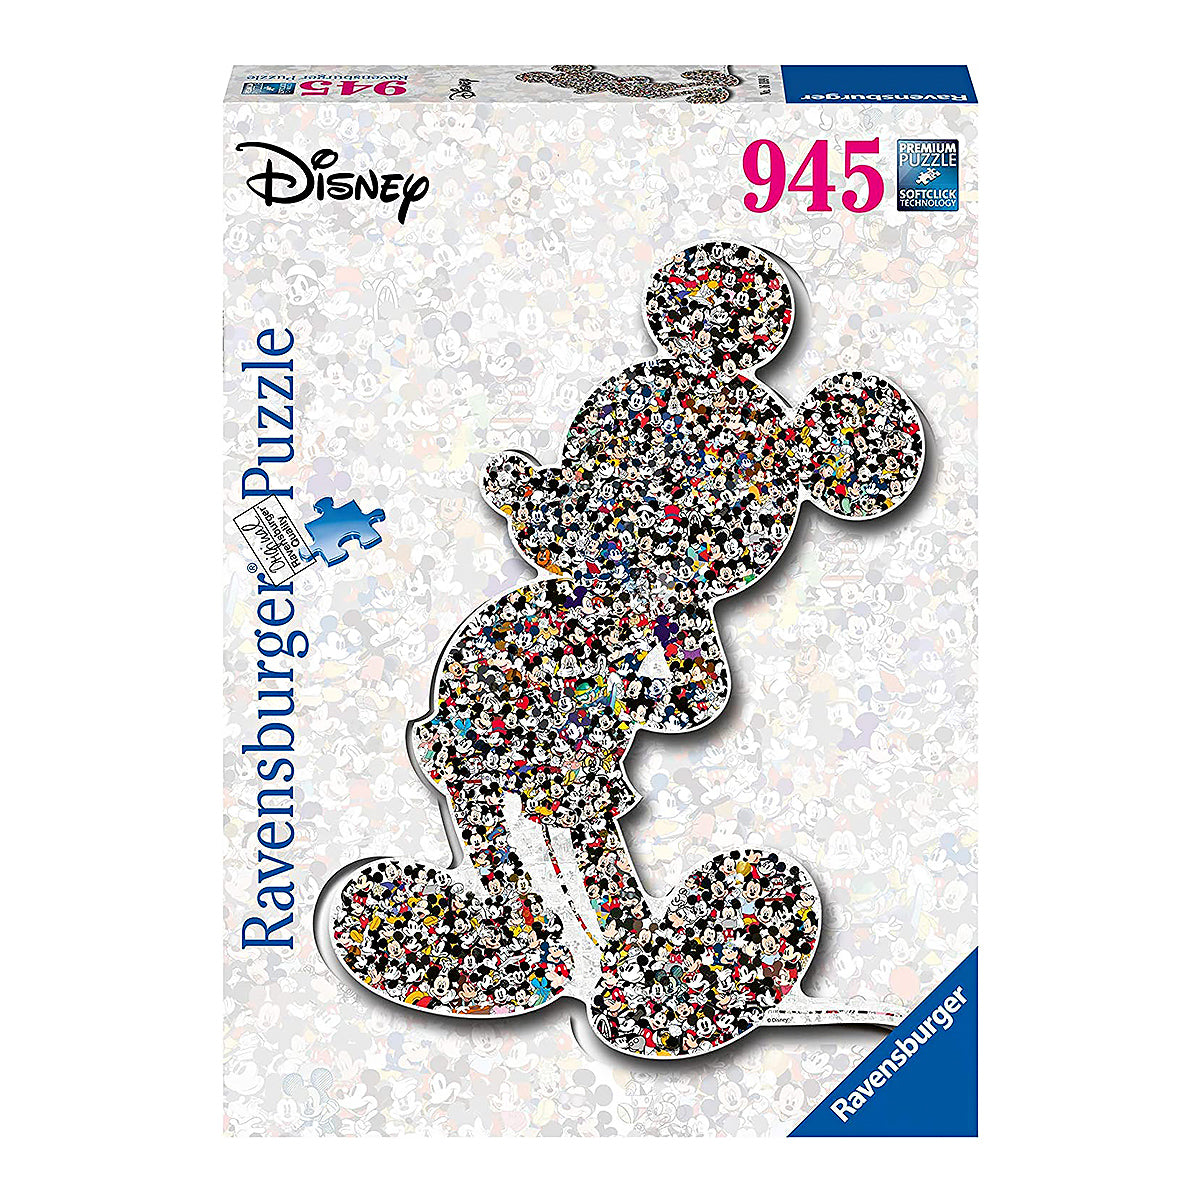 Only true Disney-lovers will be able to solve this 945-piece Mickey Mouse collage. While you're working on the puzzle, go ahead and throw on your favourite Disney film!